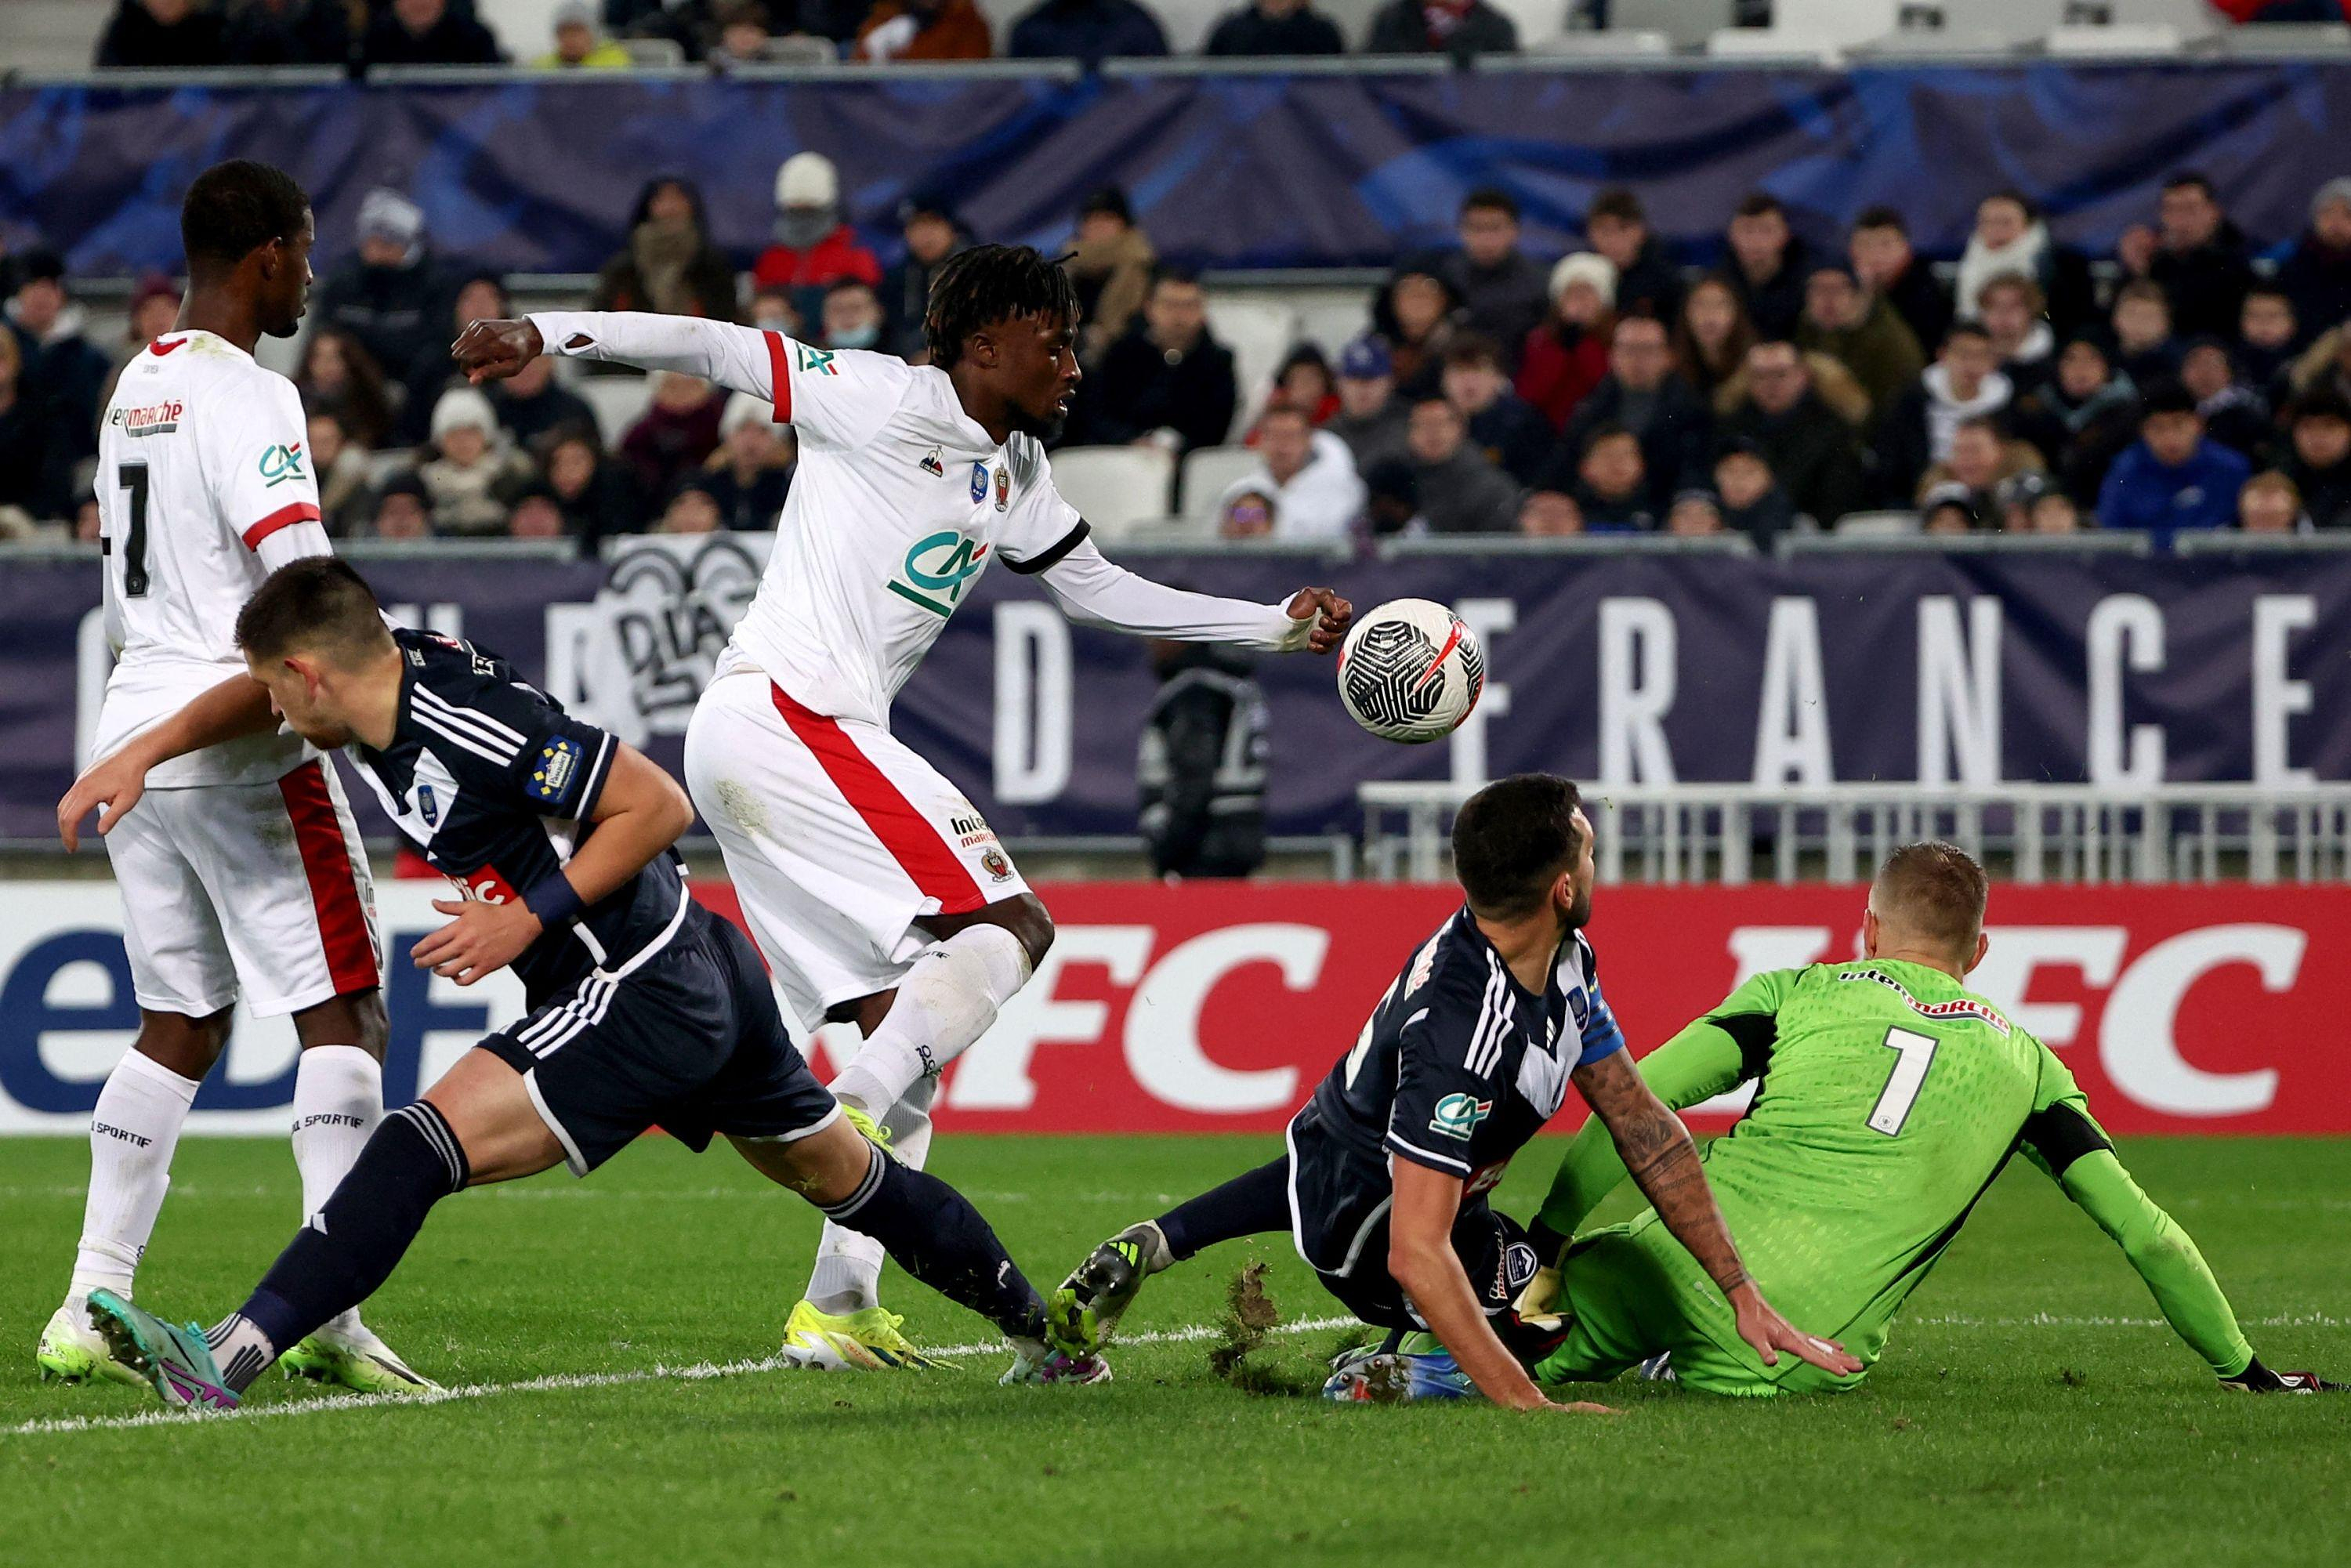 Multiplex Coupe de France: Nice wins in Bordeaux, Nantes takes the door… All the results